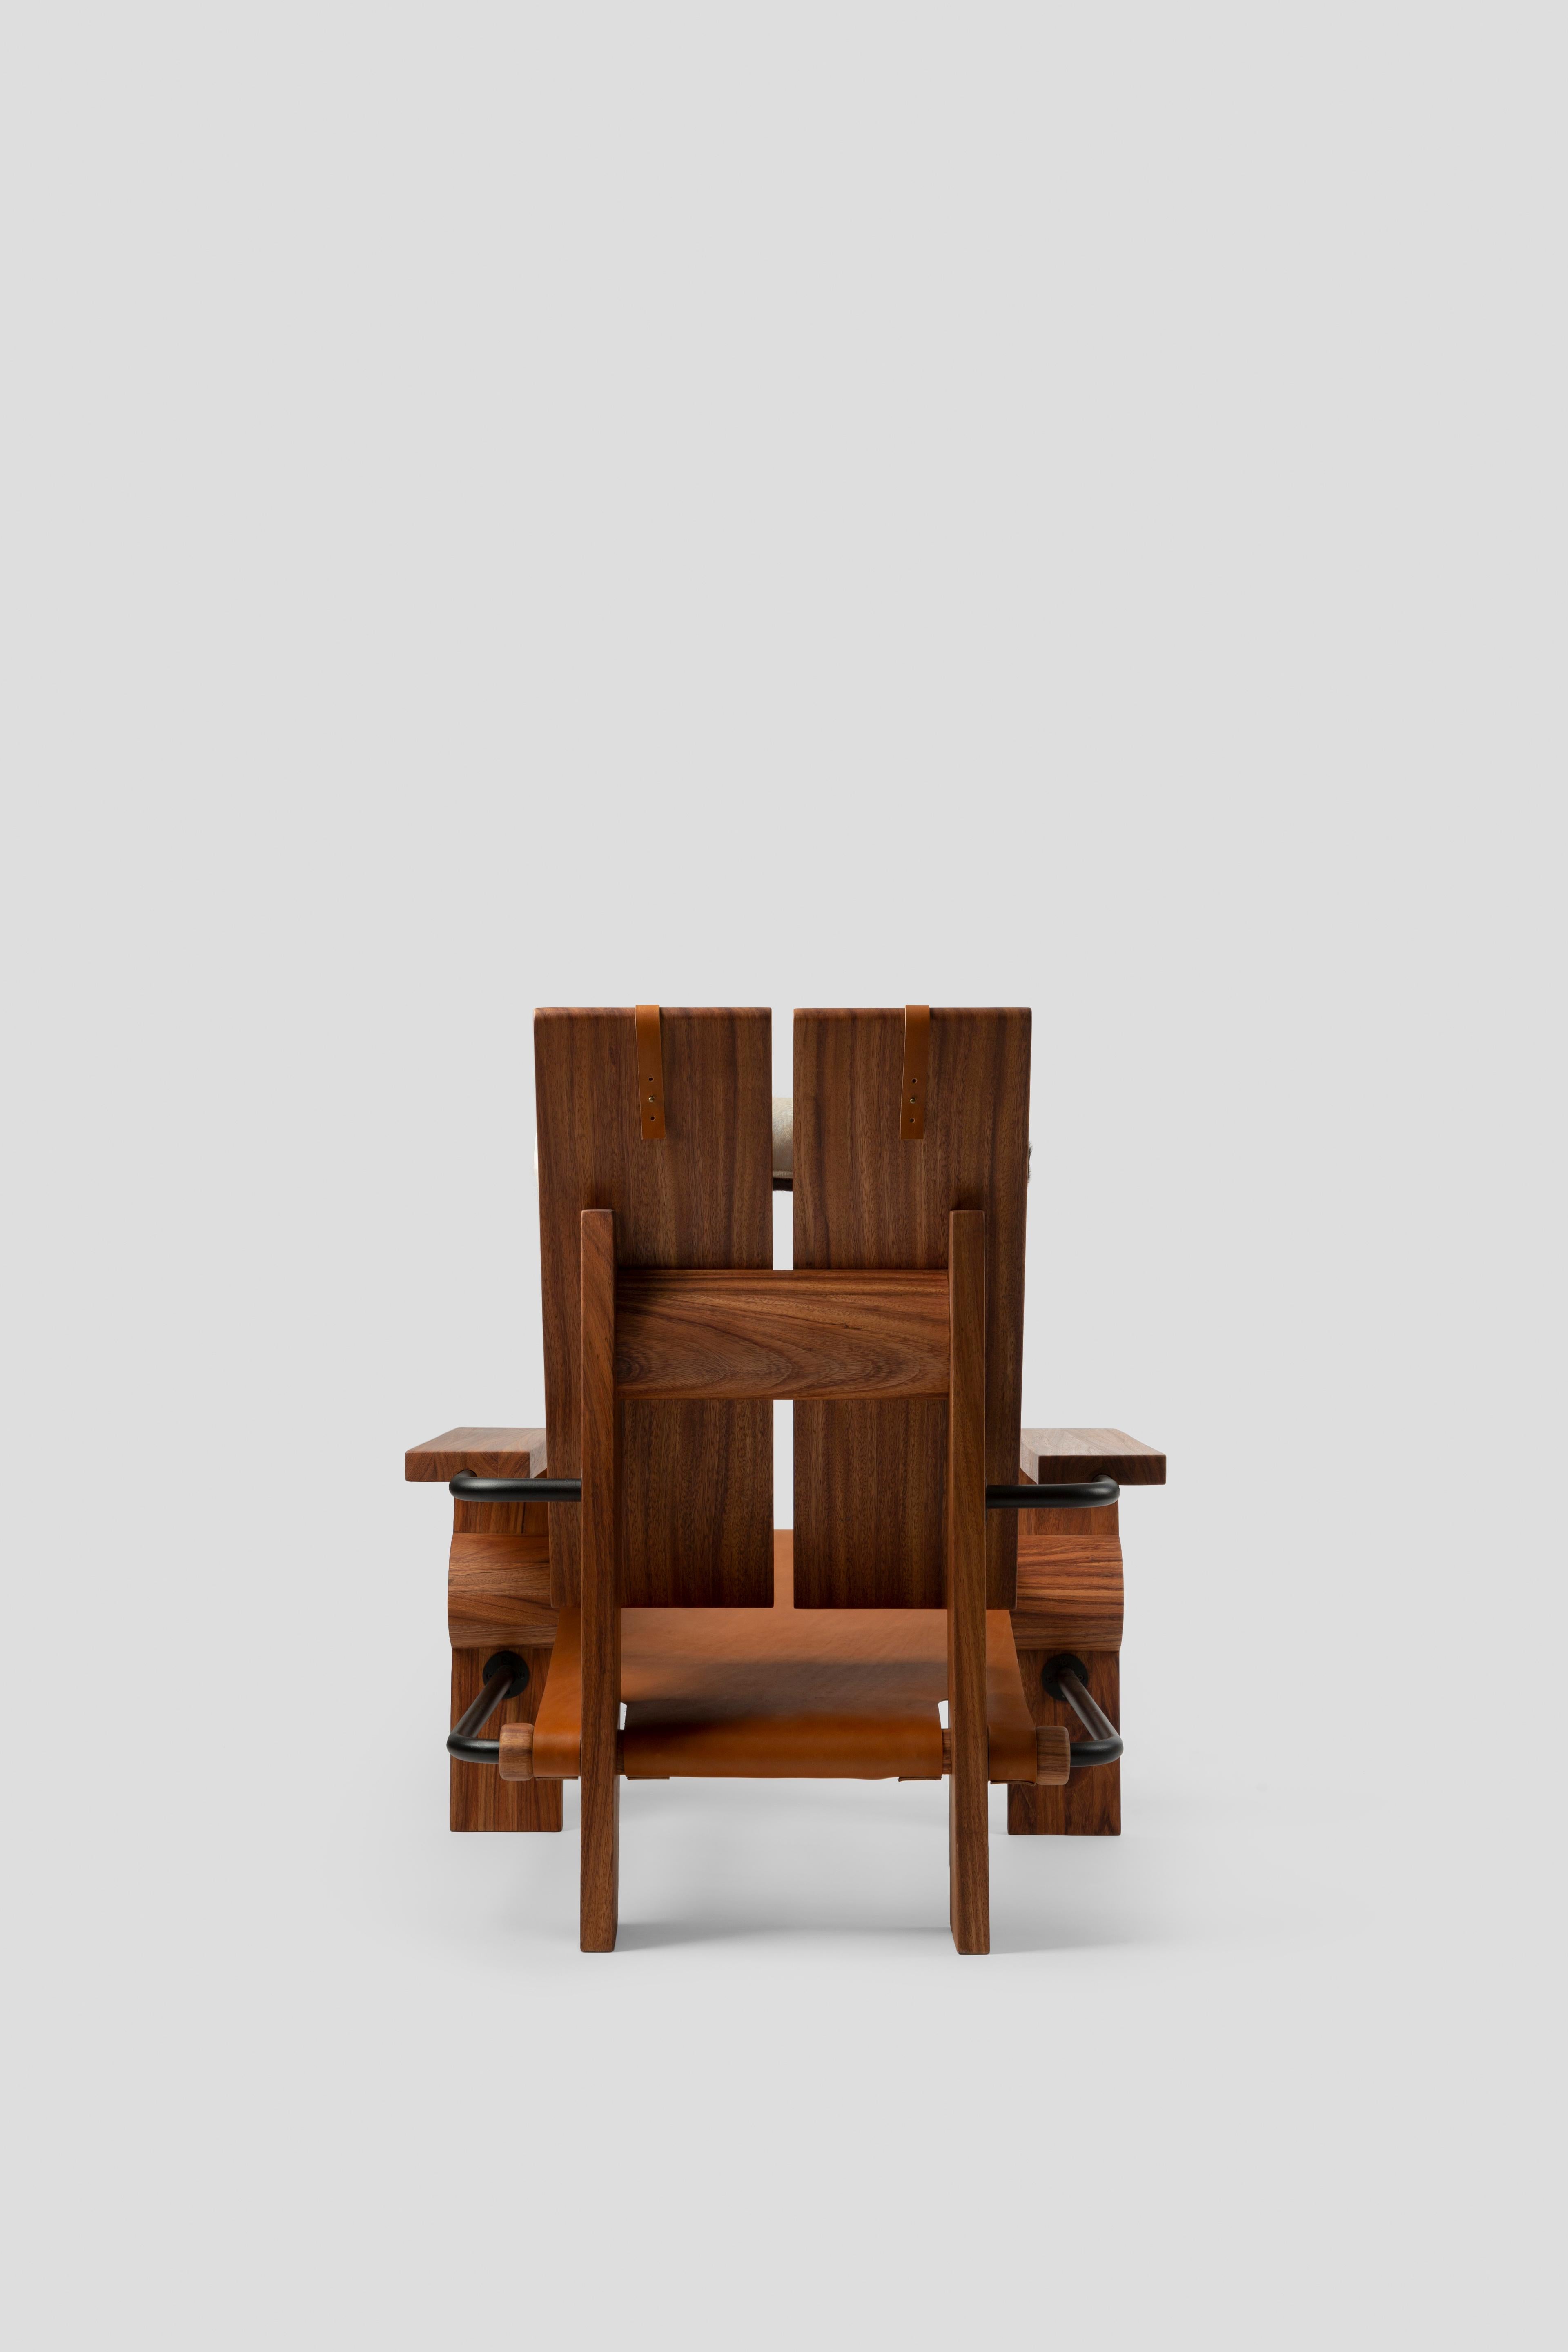 Modern San Francisco chair, Leather and Dark Tropical Wood, Contemporary Mexican Design For Sale